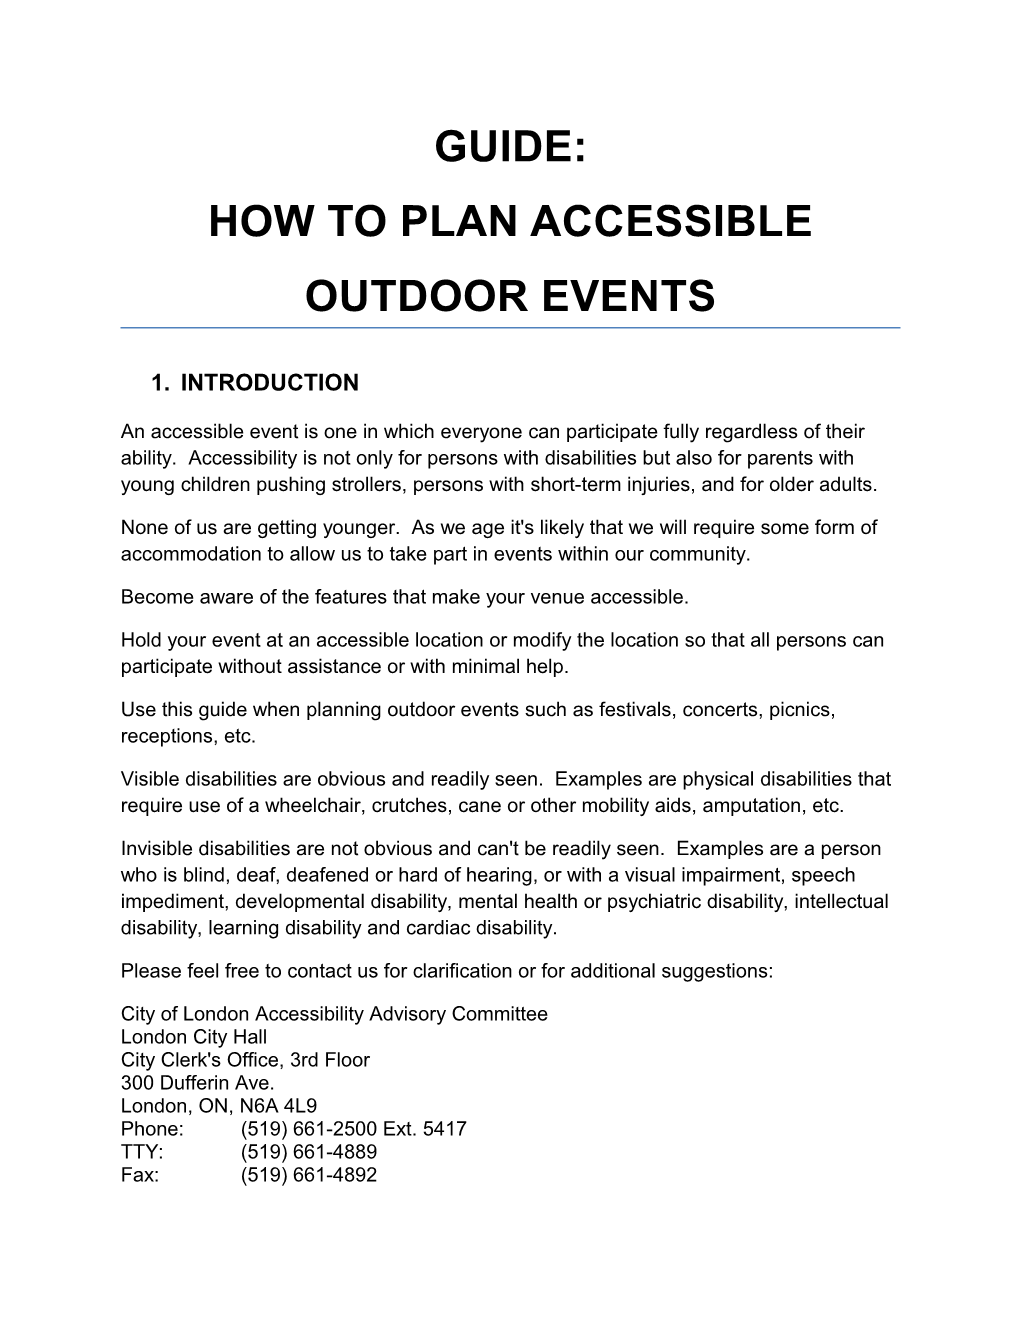 Accessible Outdoor Event Guide